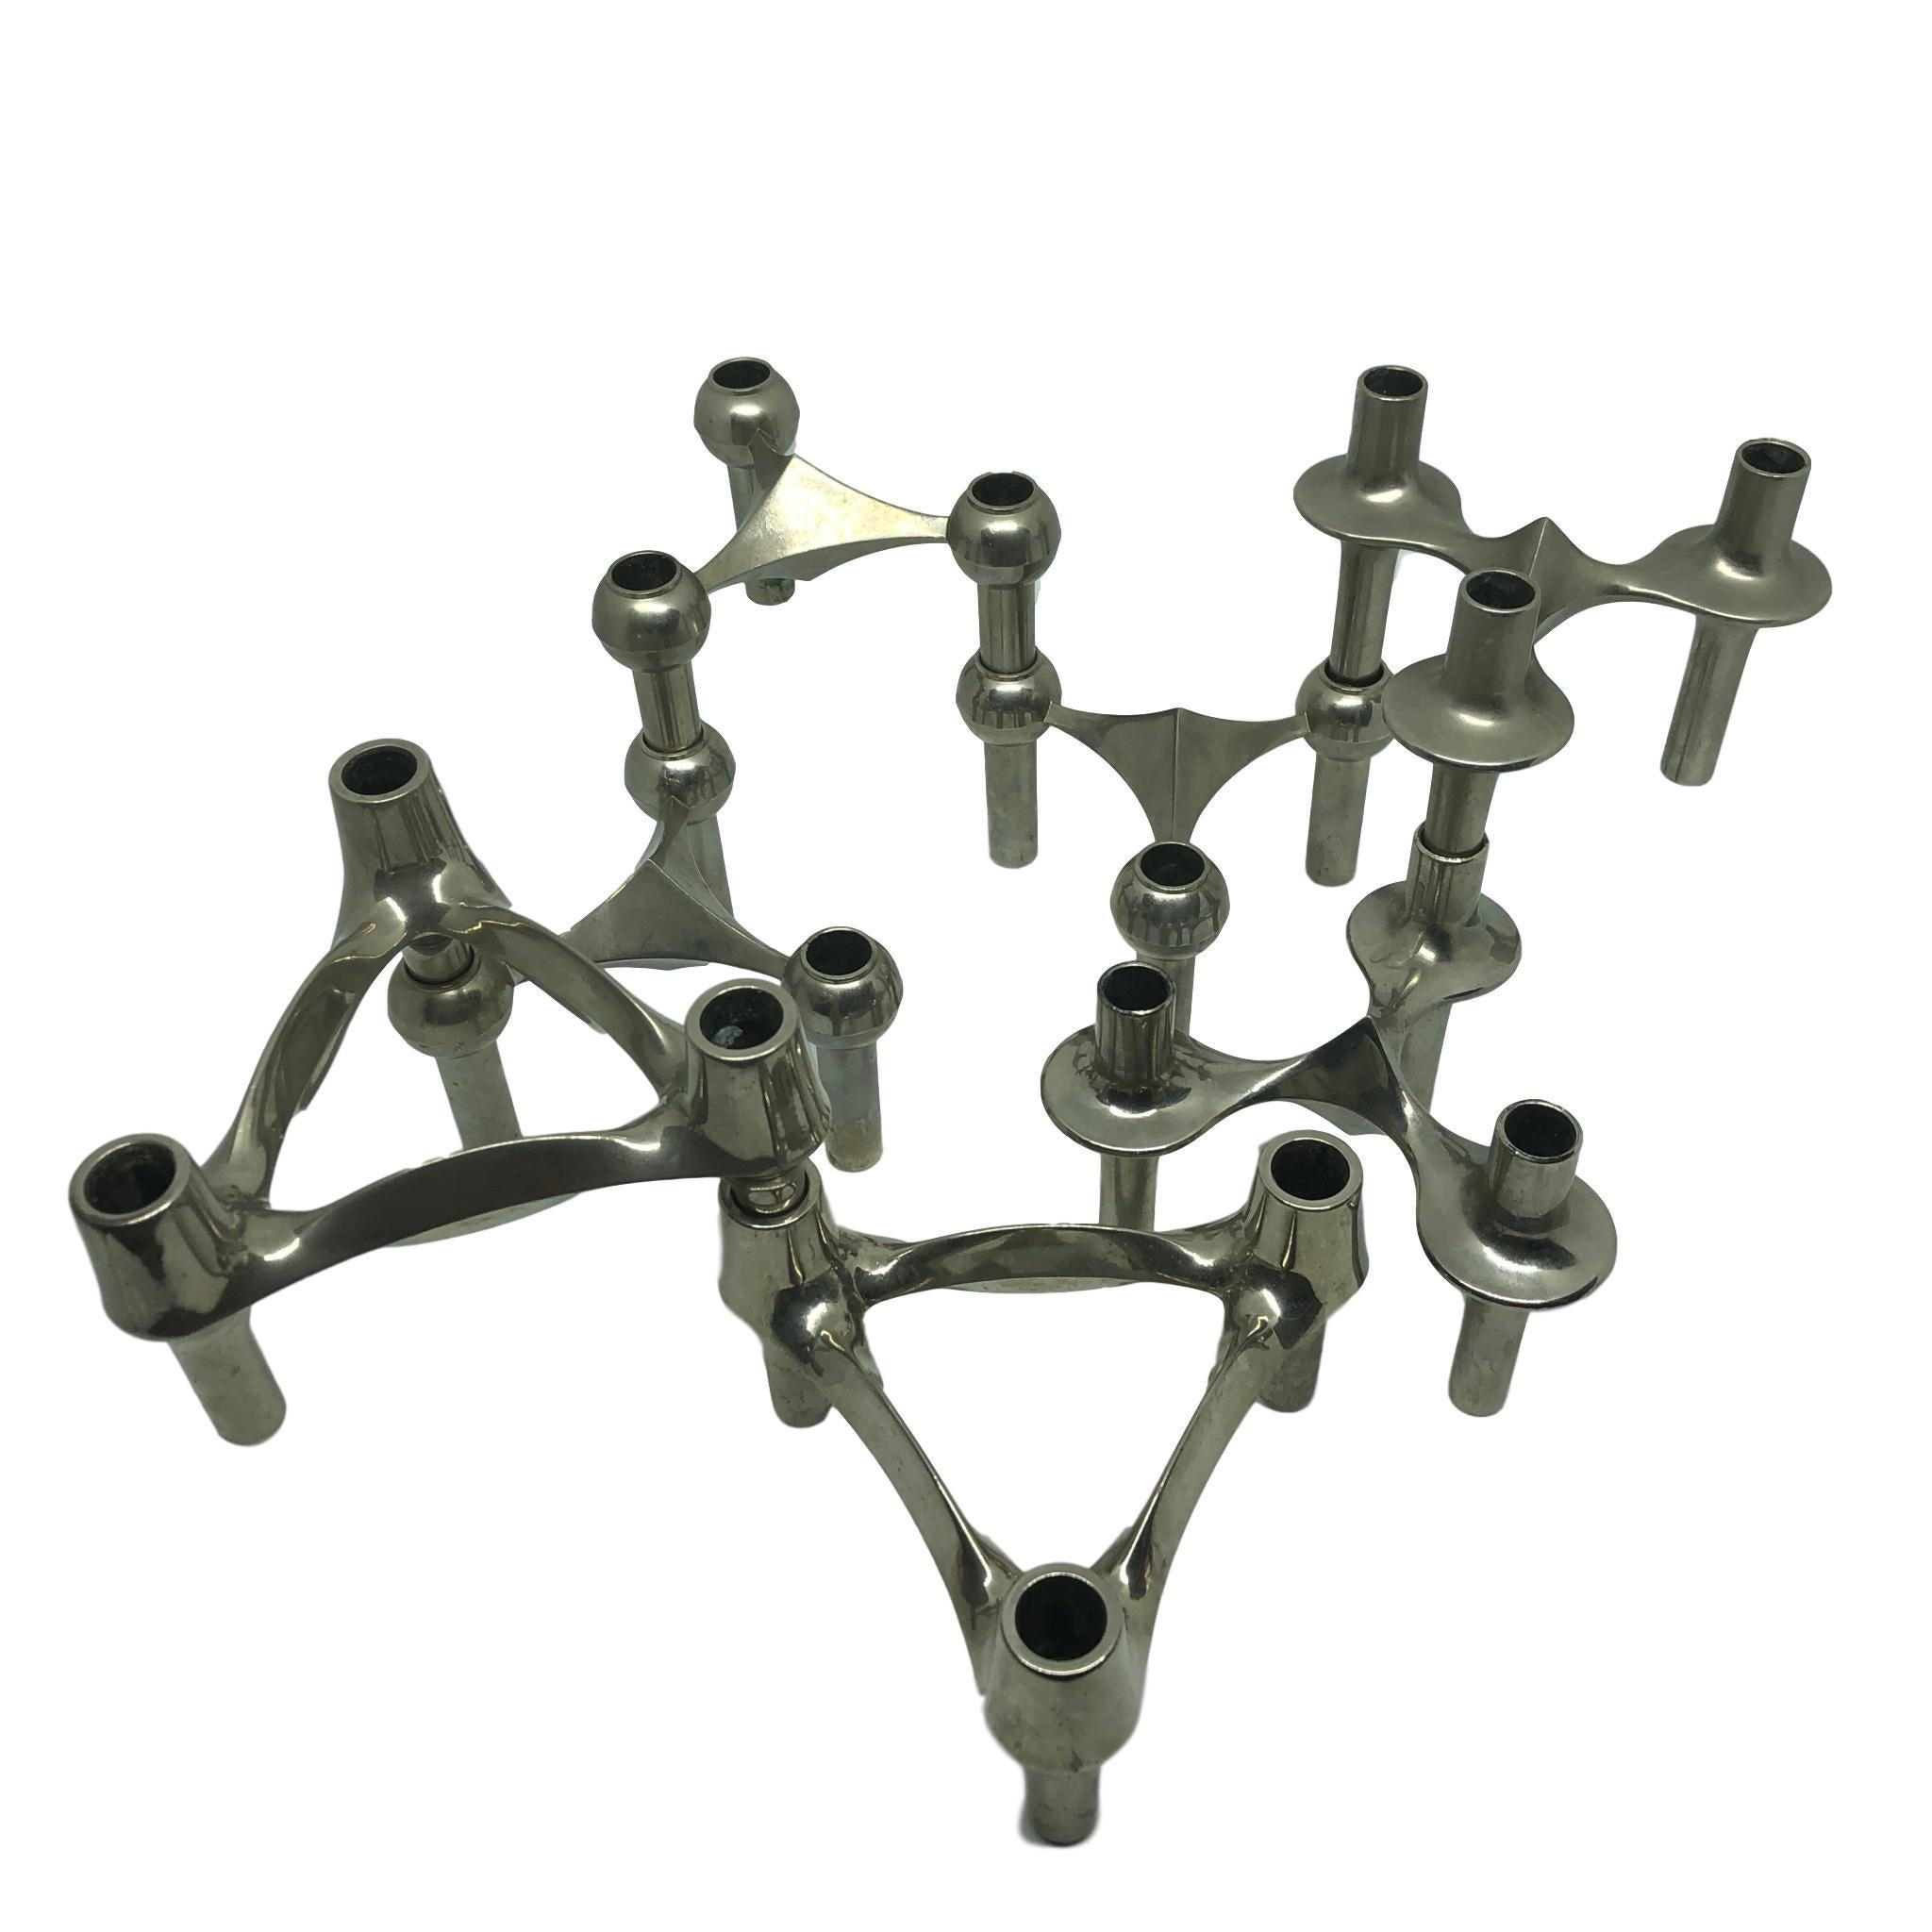 Unusual set of seven midcentury modular triangle shaped chrome candle holders by BMF. Made in Germany in the 1970s. The candleholders can be stacked in whichever design you wish with as many candles you would like. 3 different designs like seen in